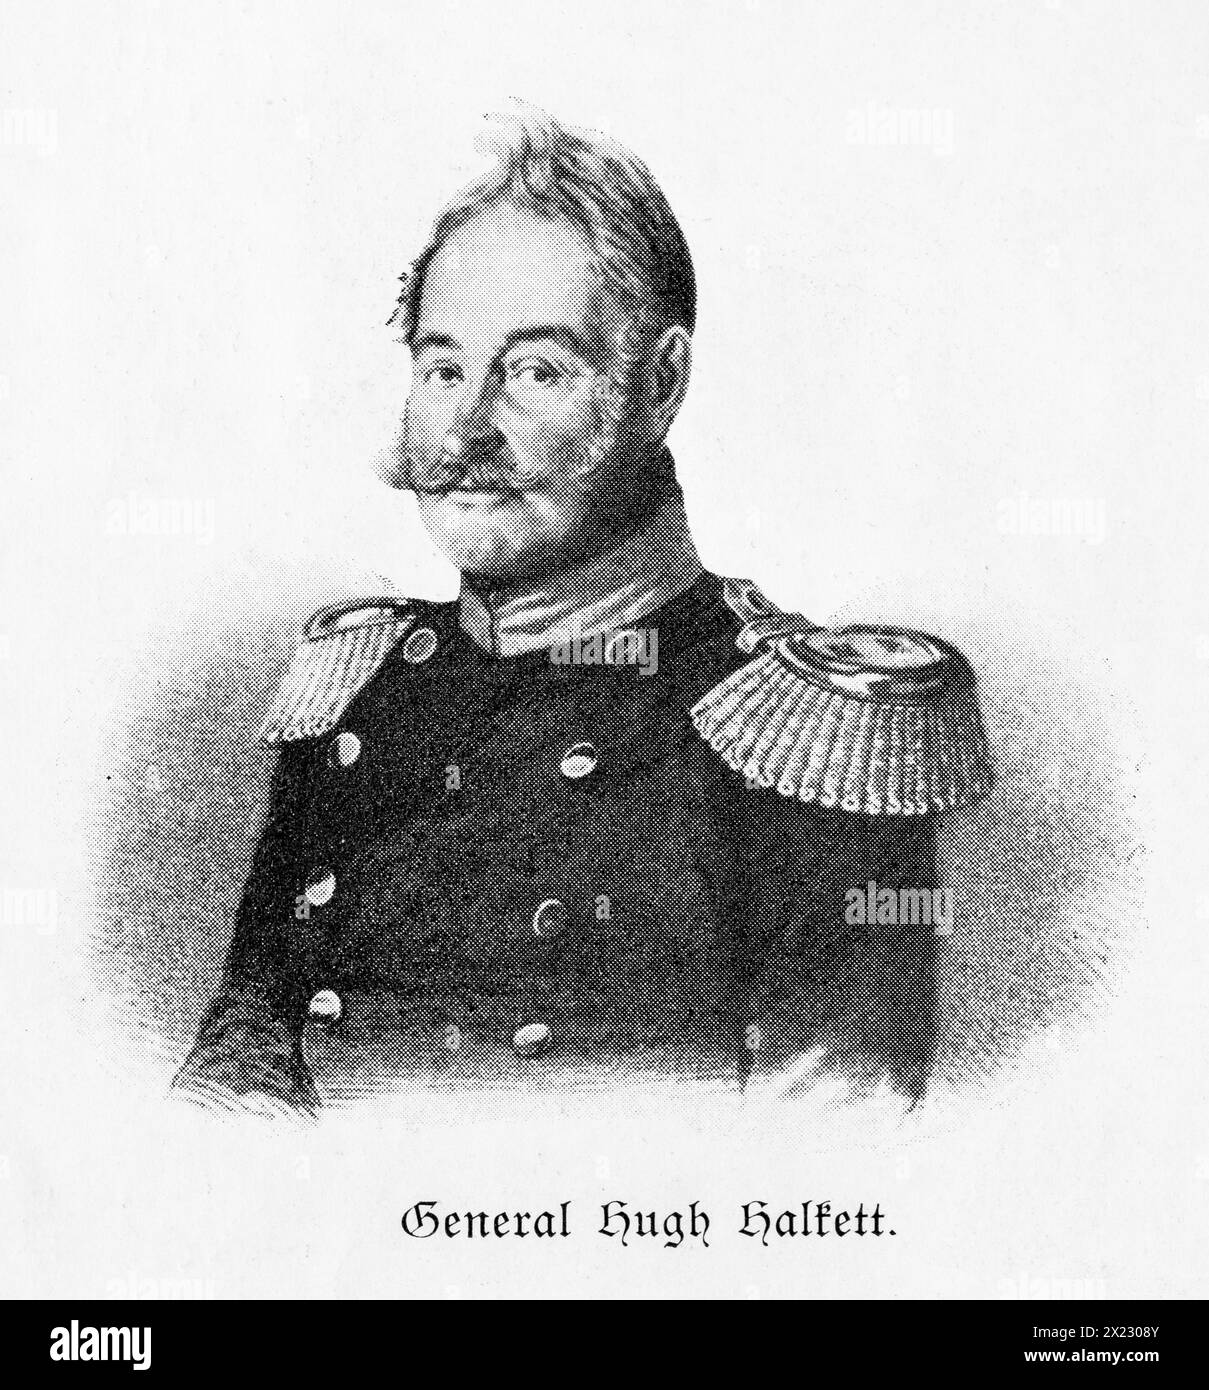 British Hanoverian General Hugh Halkett in uniform with epaulettes in a dignified pose, black and white portrait, print with visible halftone dots Stock Photo